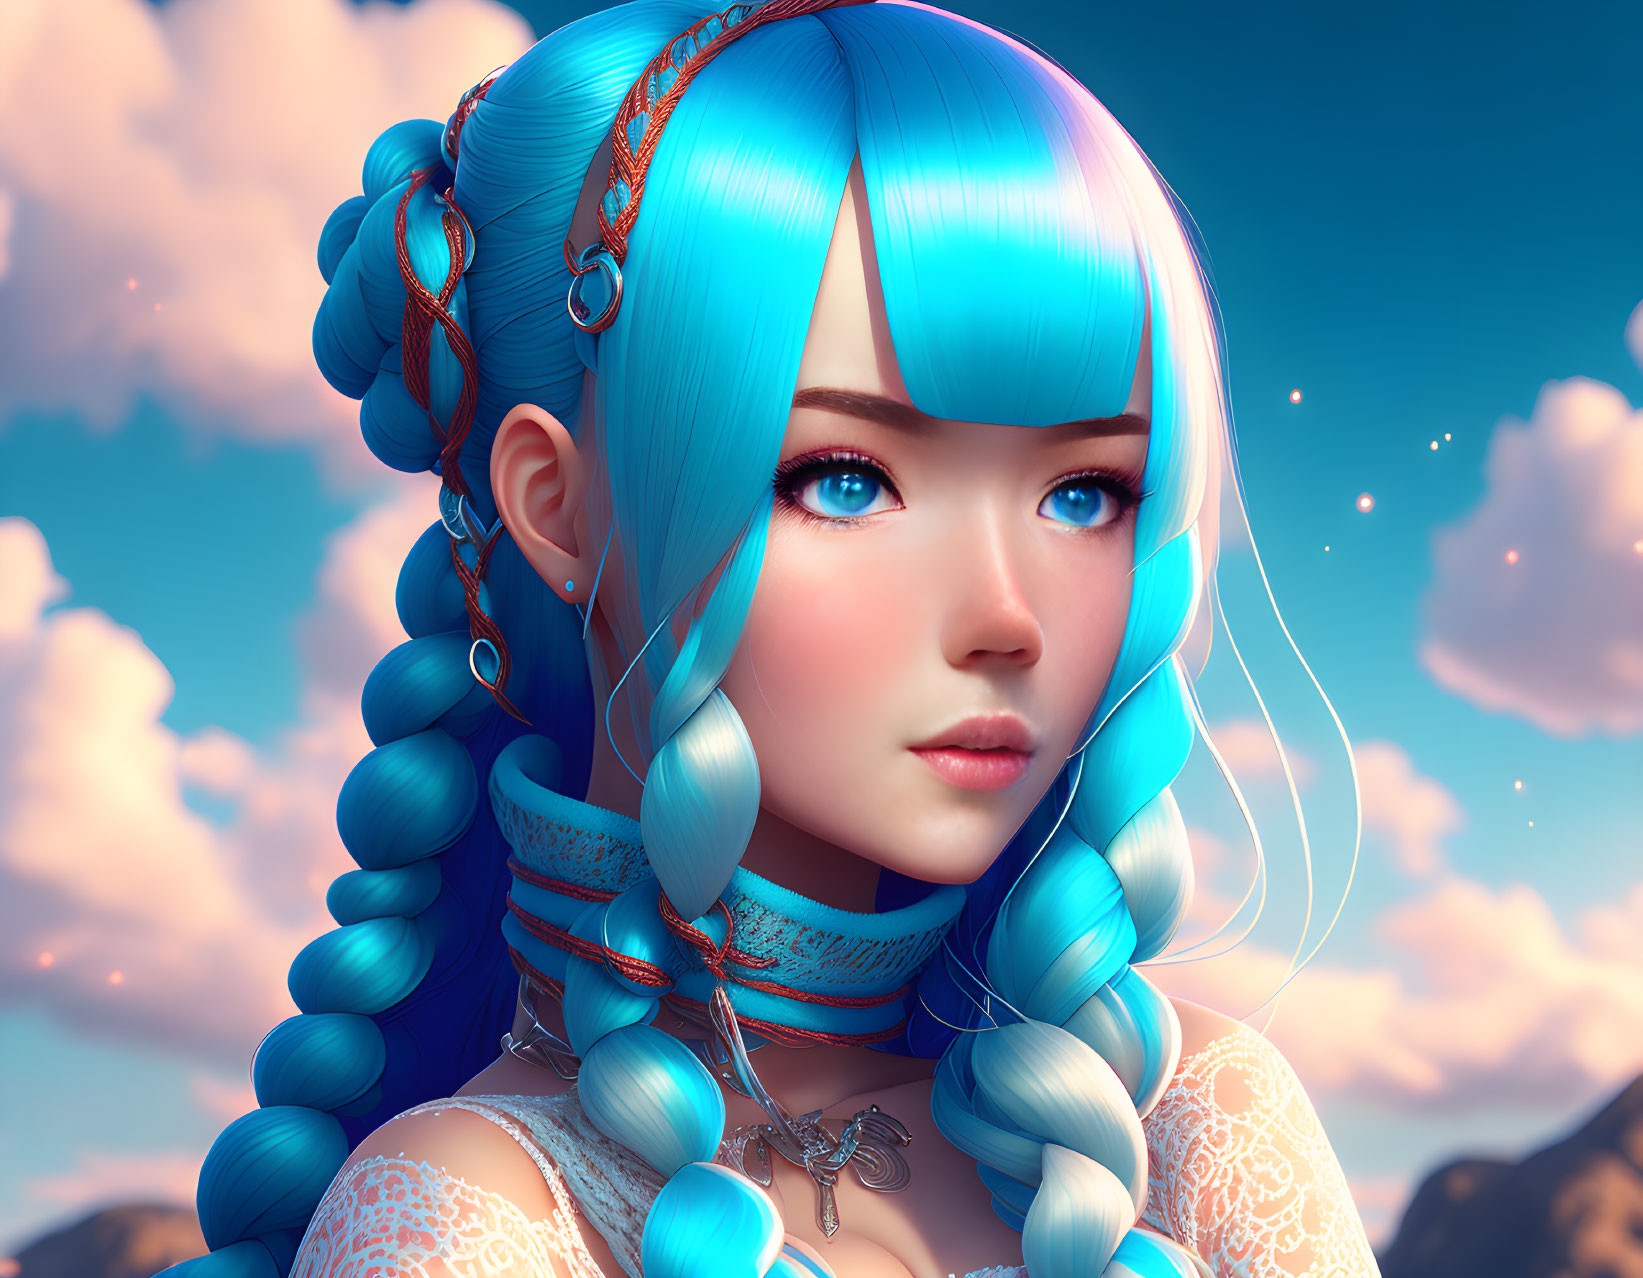 Vibrant blue hair girl with braids and jewelry in 3D illustration